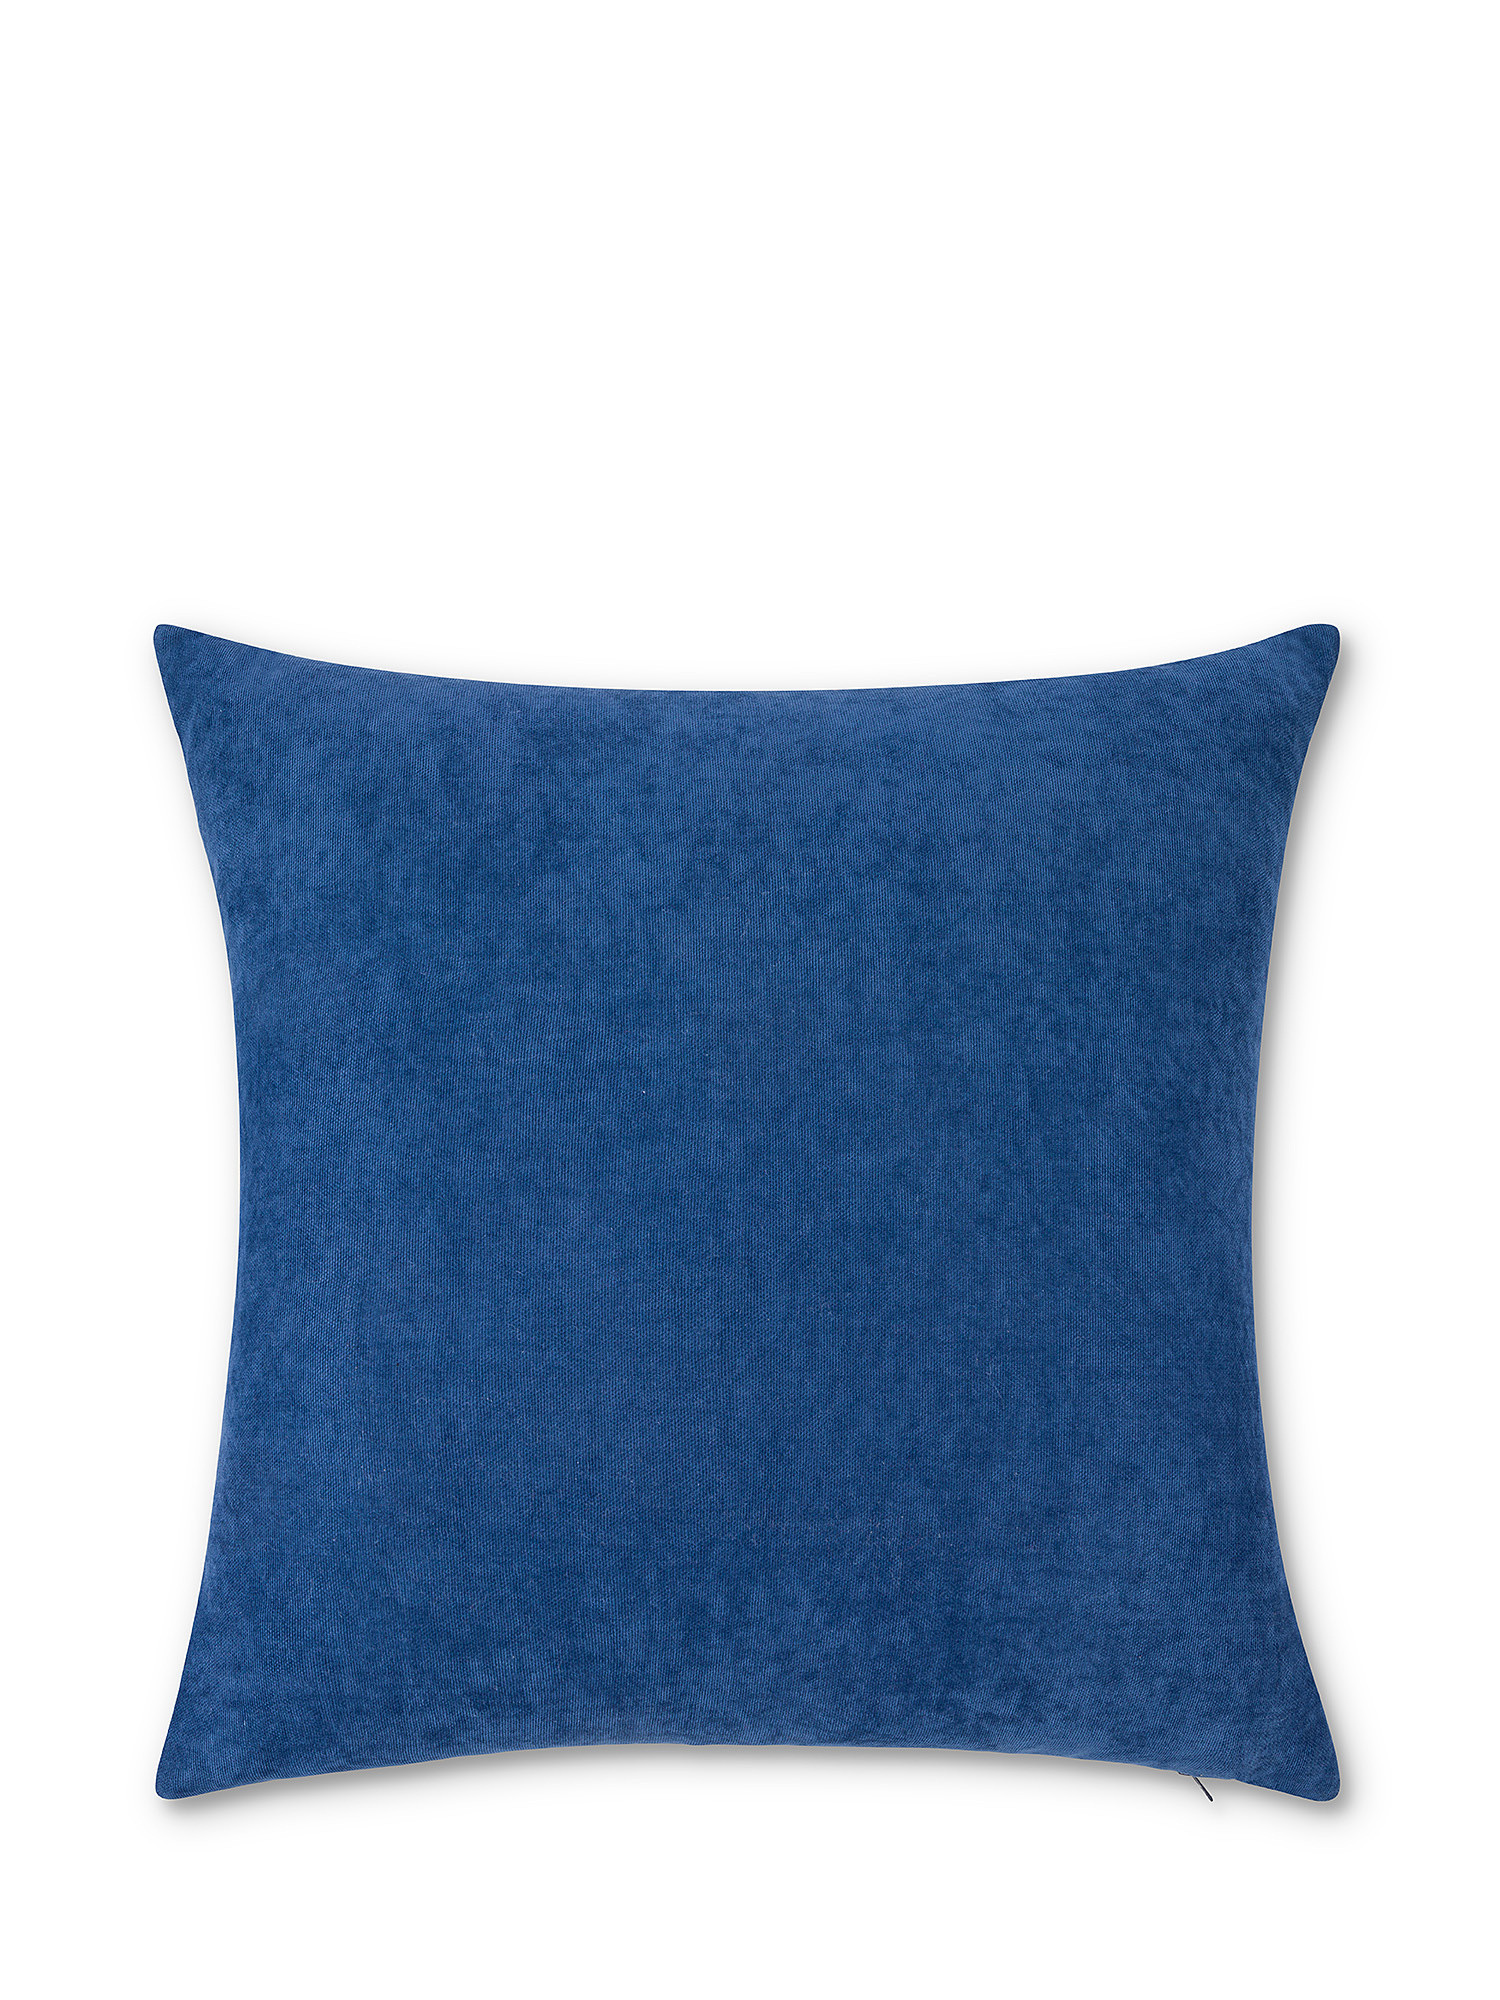 Striped pattern fabric cushion 45x45cm, Blue, large image number 1